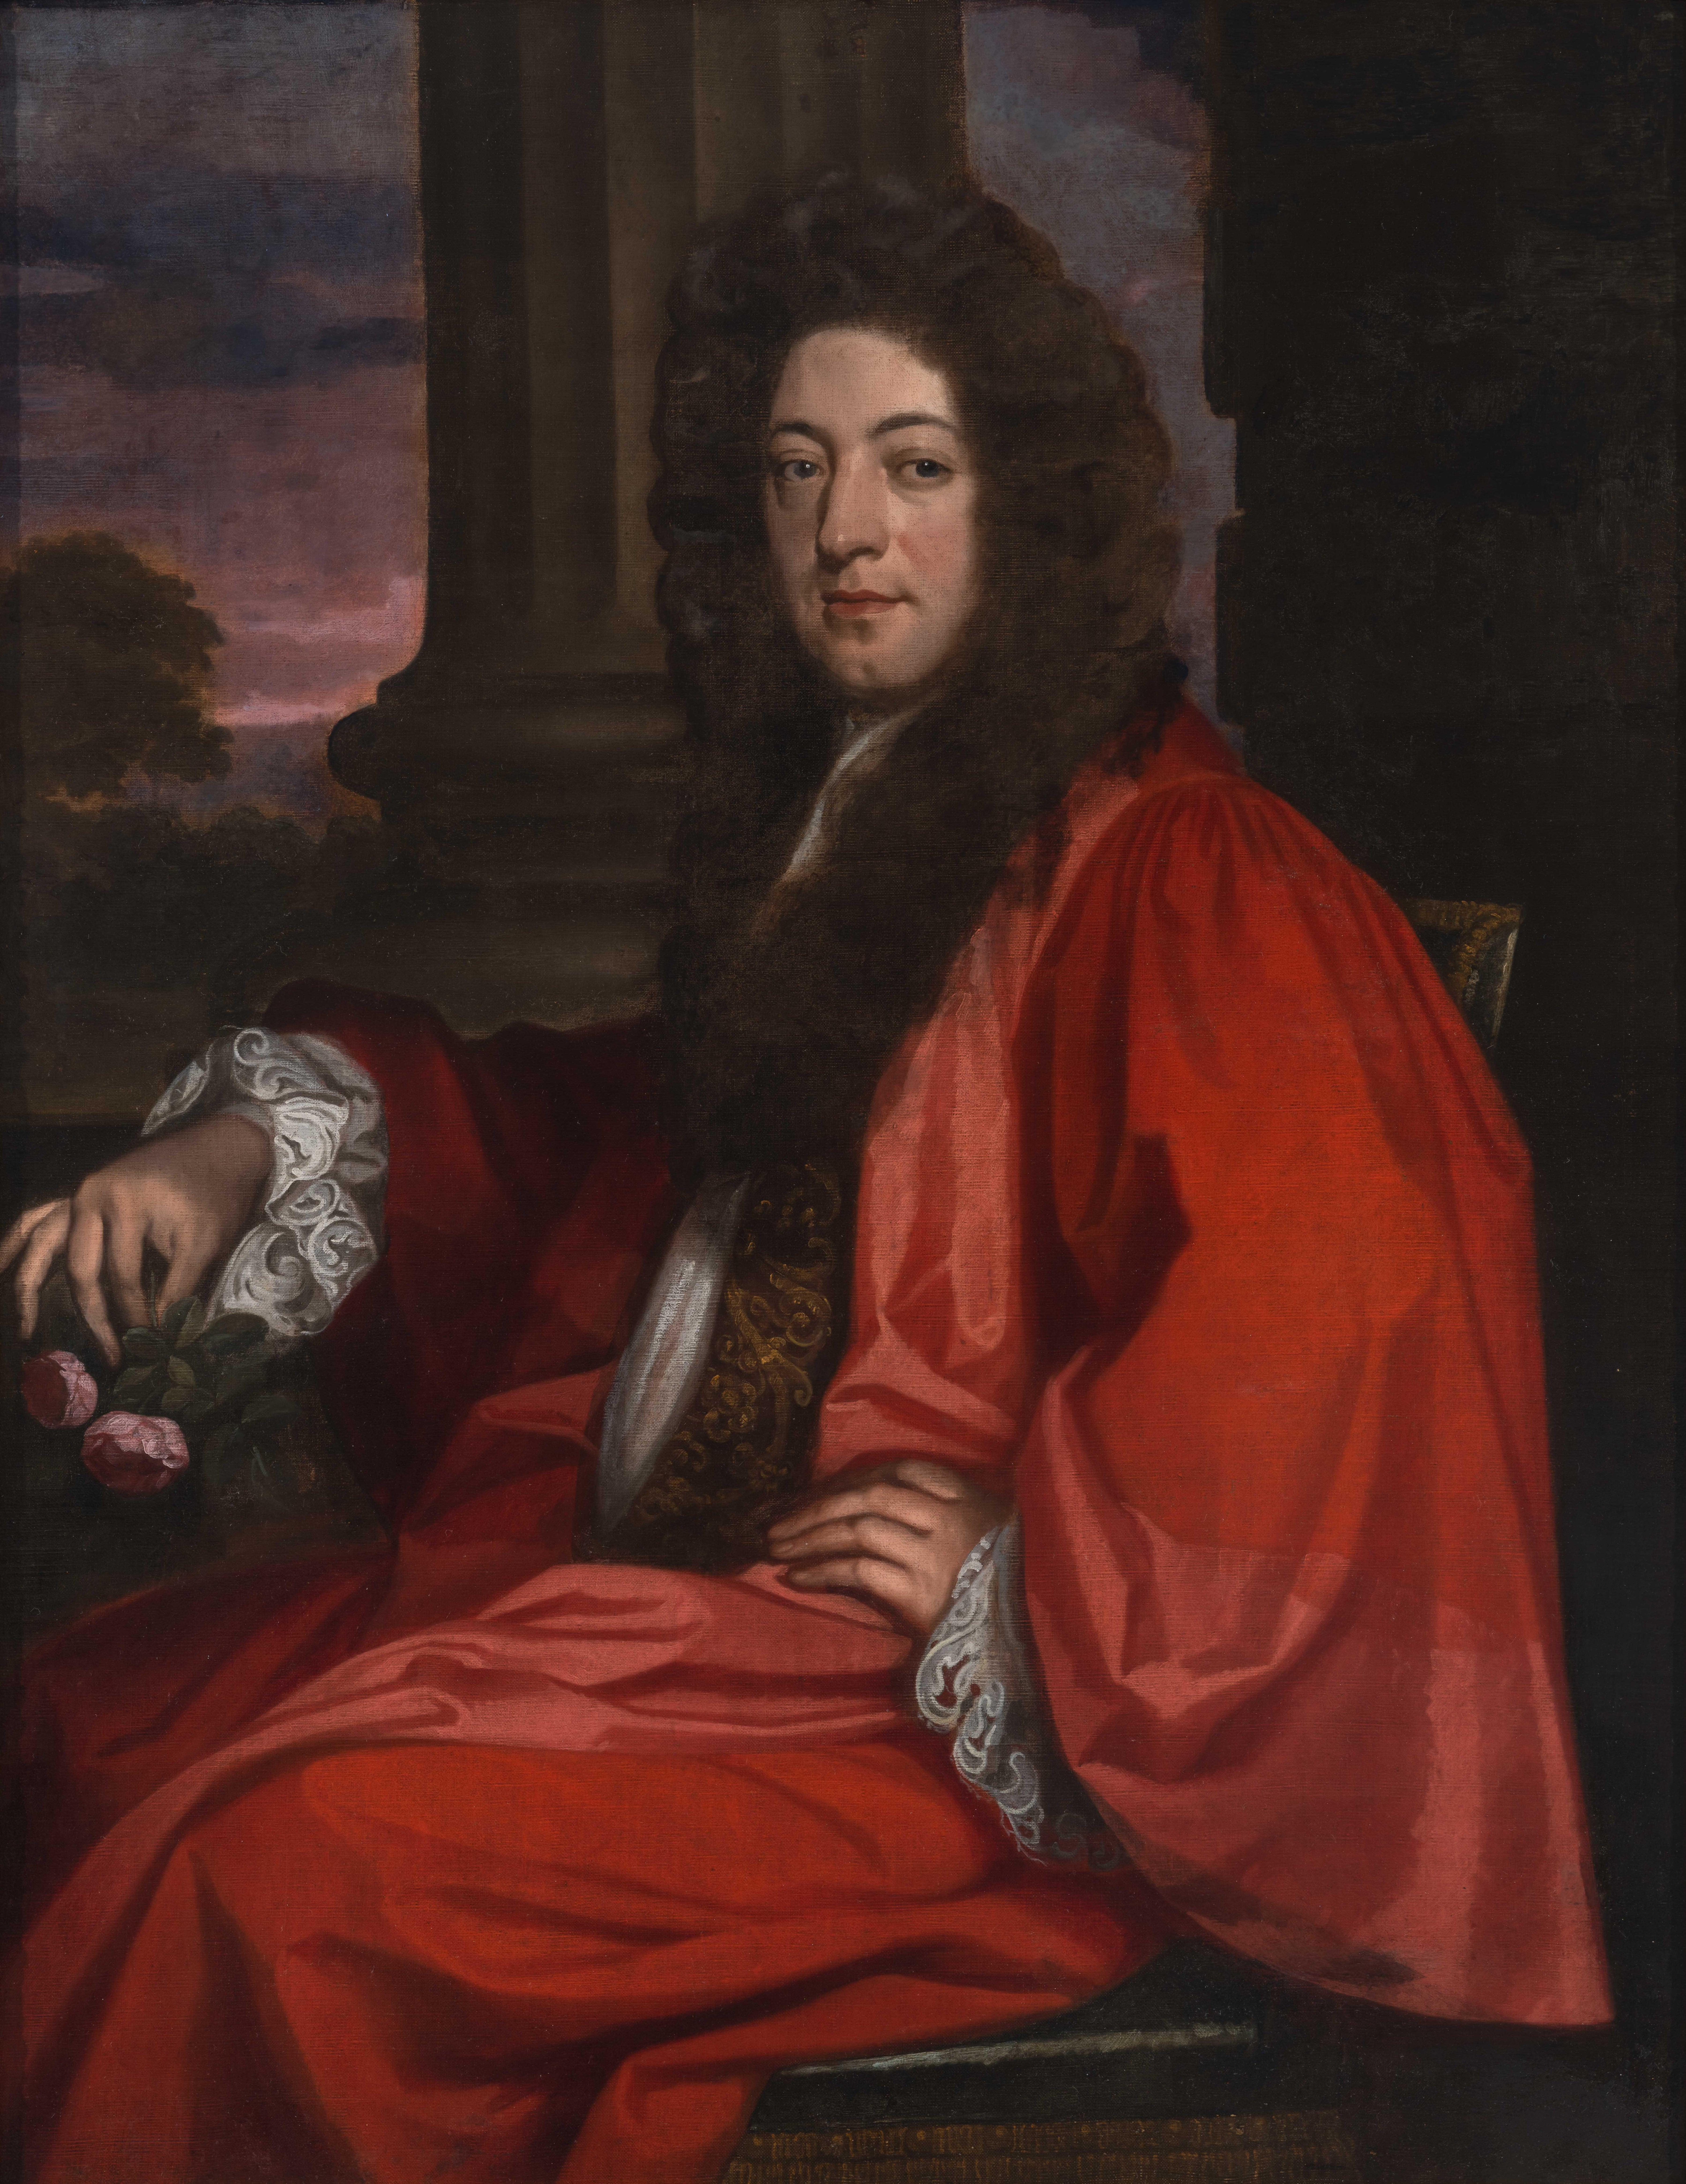 Titan Fine Art present this striking portrait, which was painted by one of the most talented artists working in England during the last half of the 17th century, John Greenhill.  Greenhill was at the centre of the artistic scene in London and his